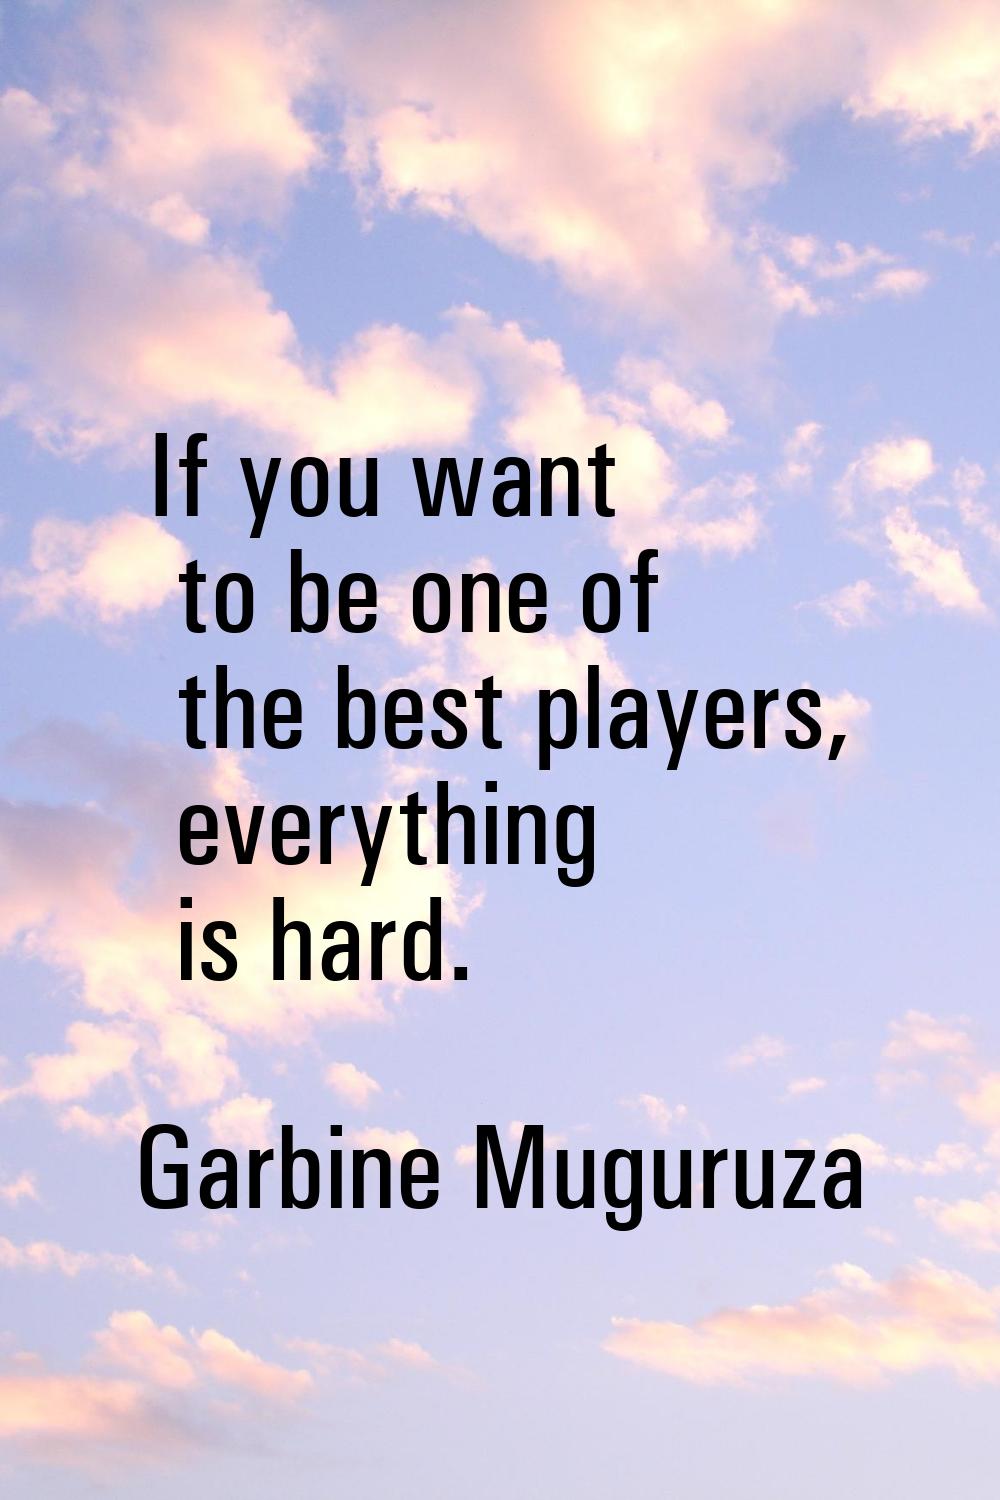 If you want to be one of the best players, everything is hard.